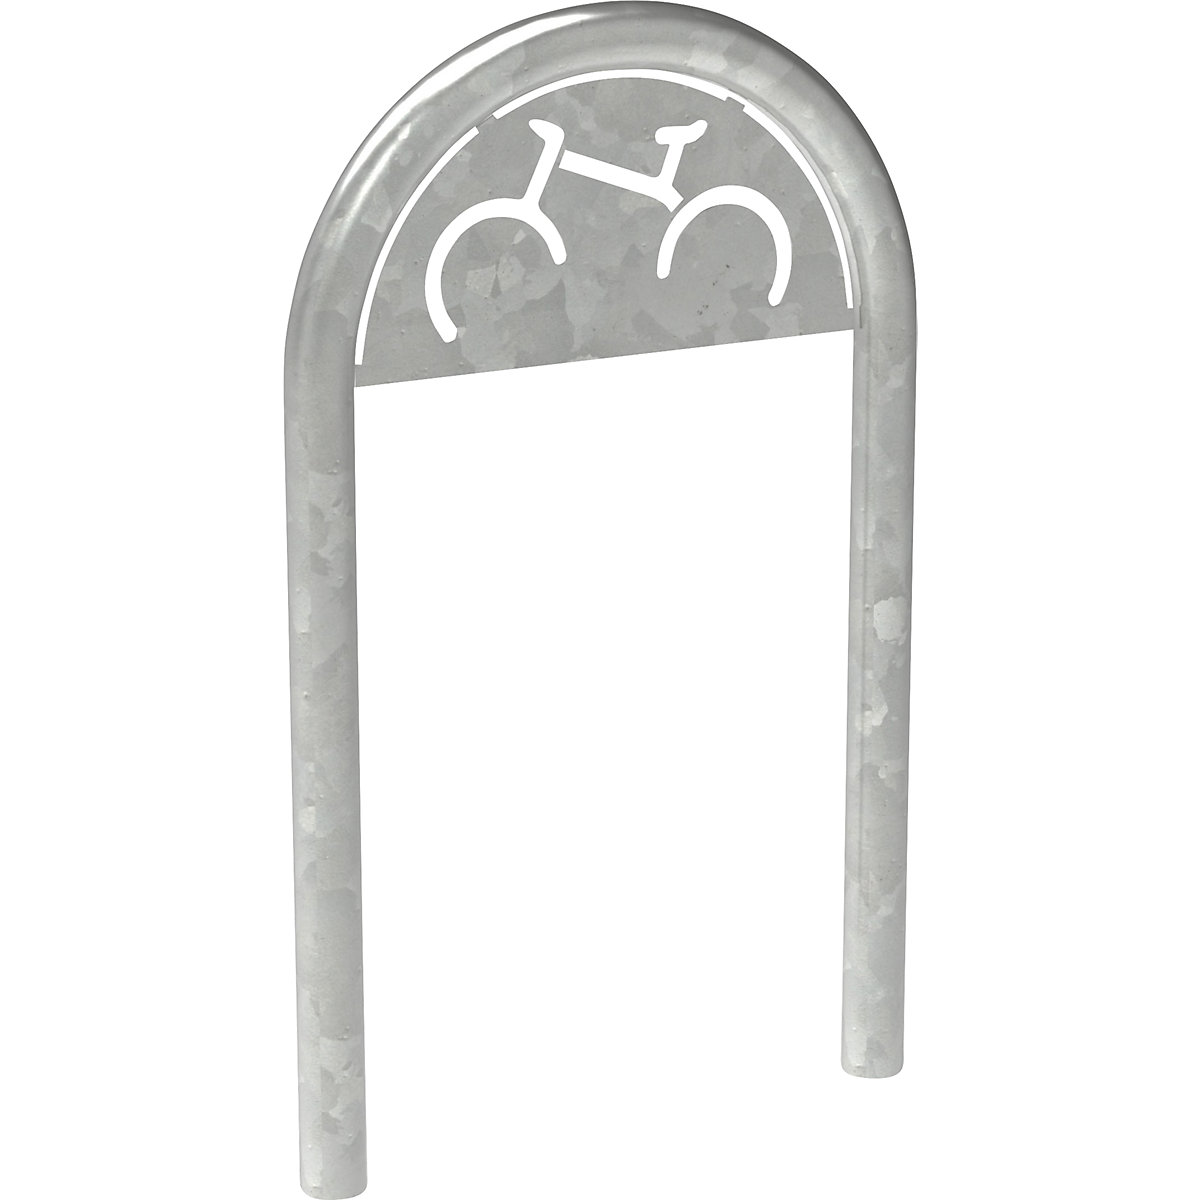 Parking rail with sign – PROCITY